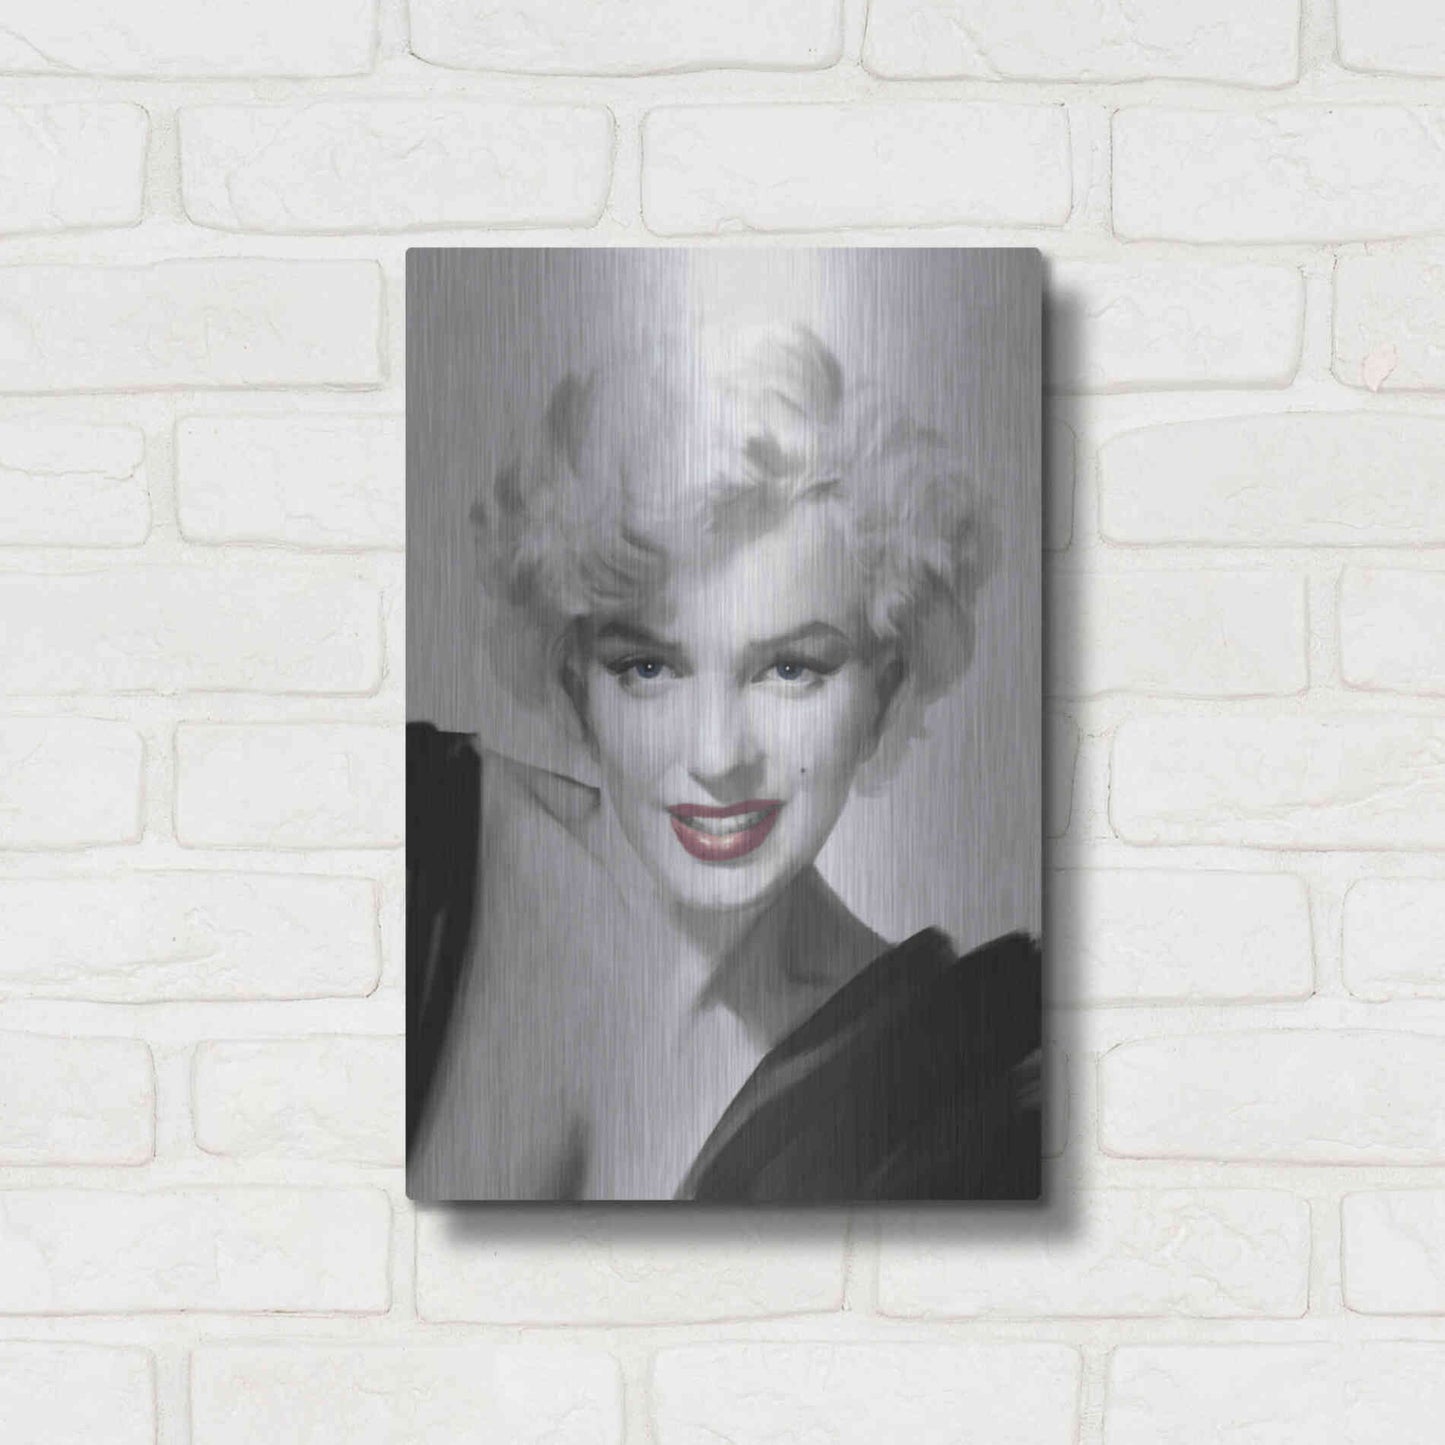 Luxe Metal Art 'The Look Red Lips' by Chris Consani, Metal Wall Art,12x16